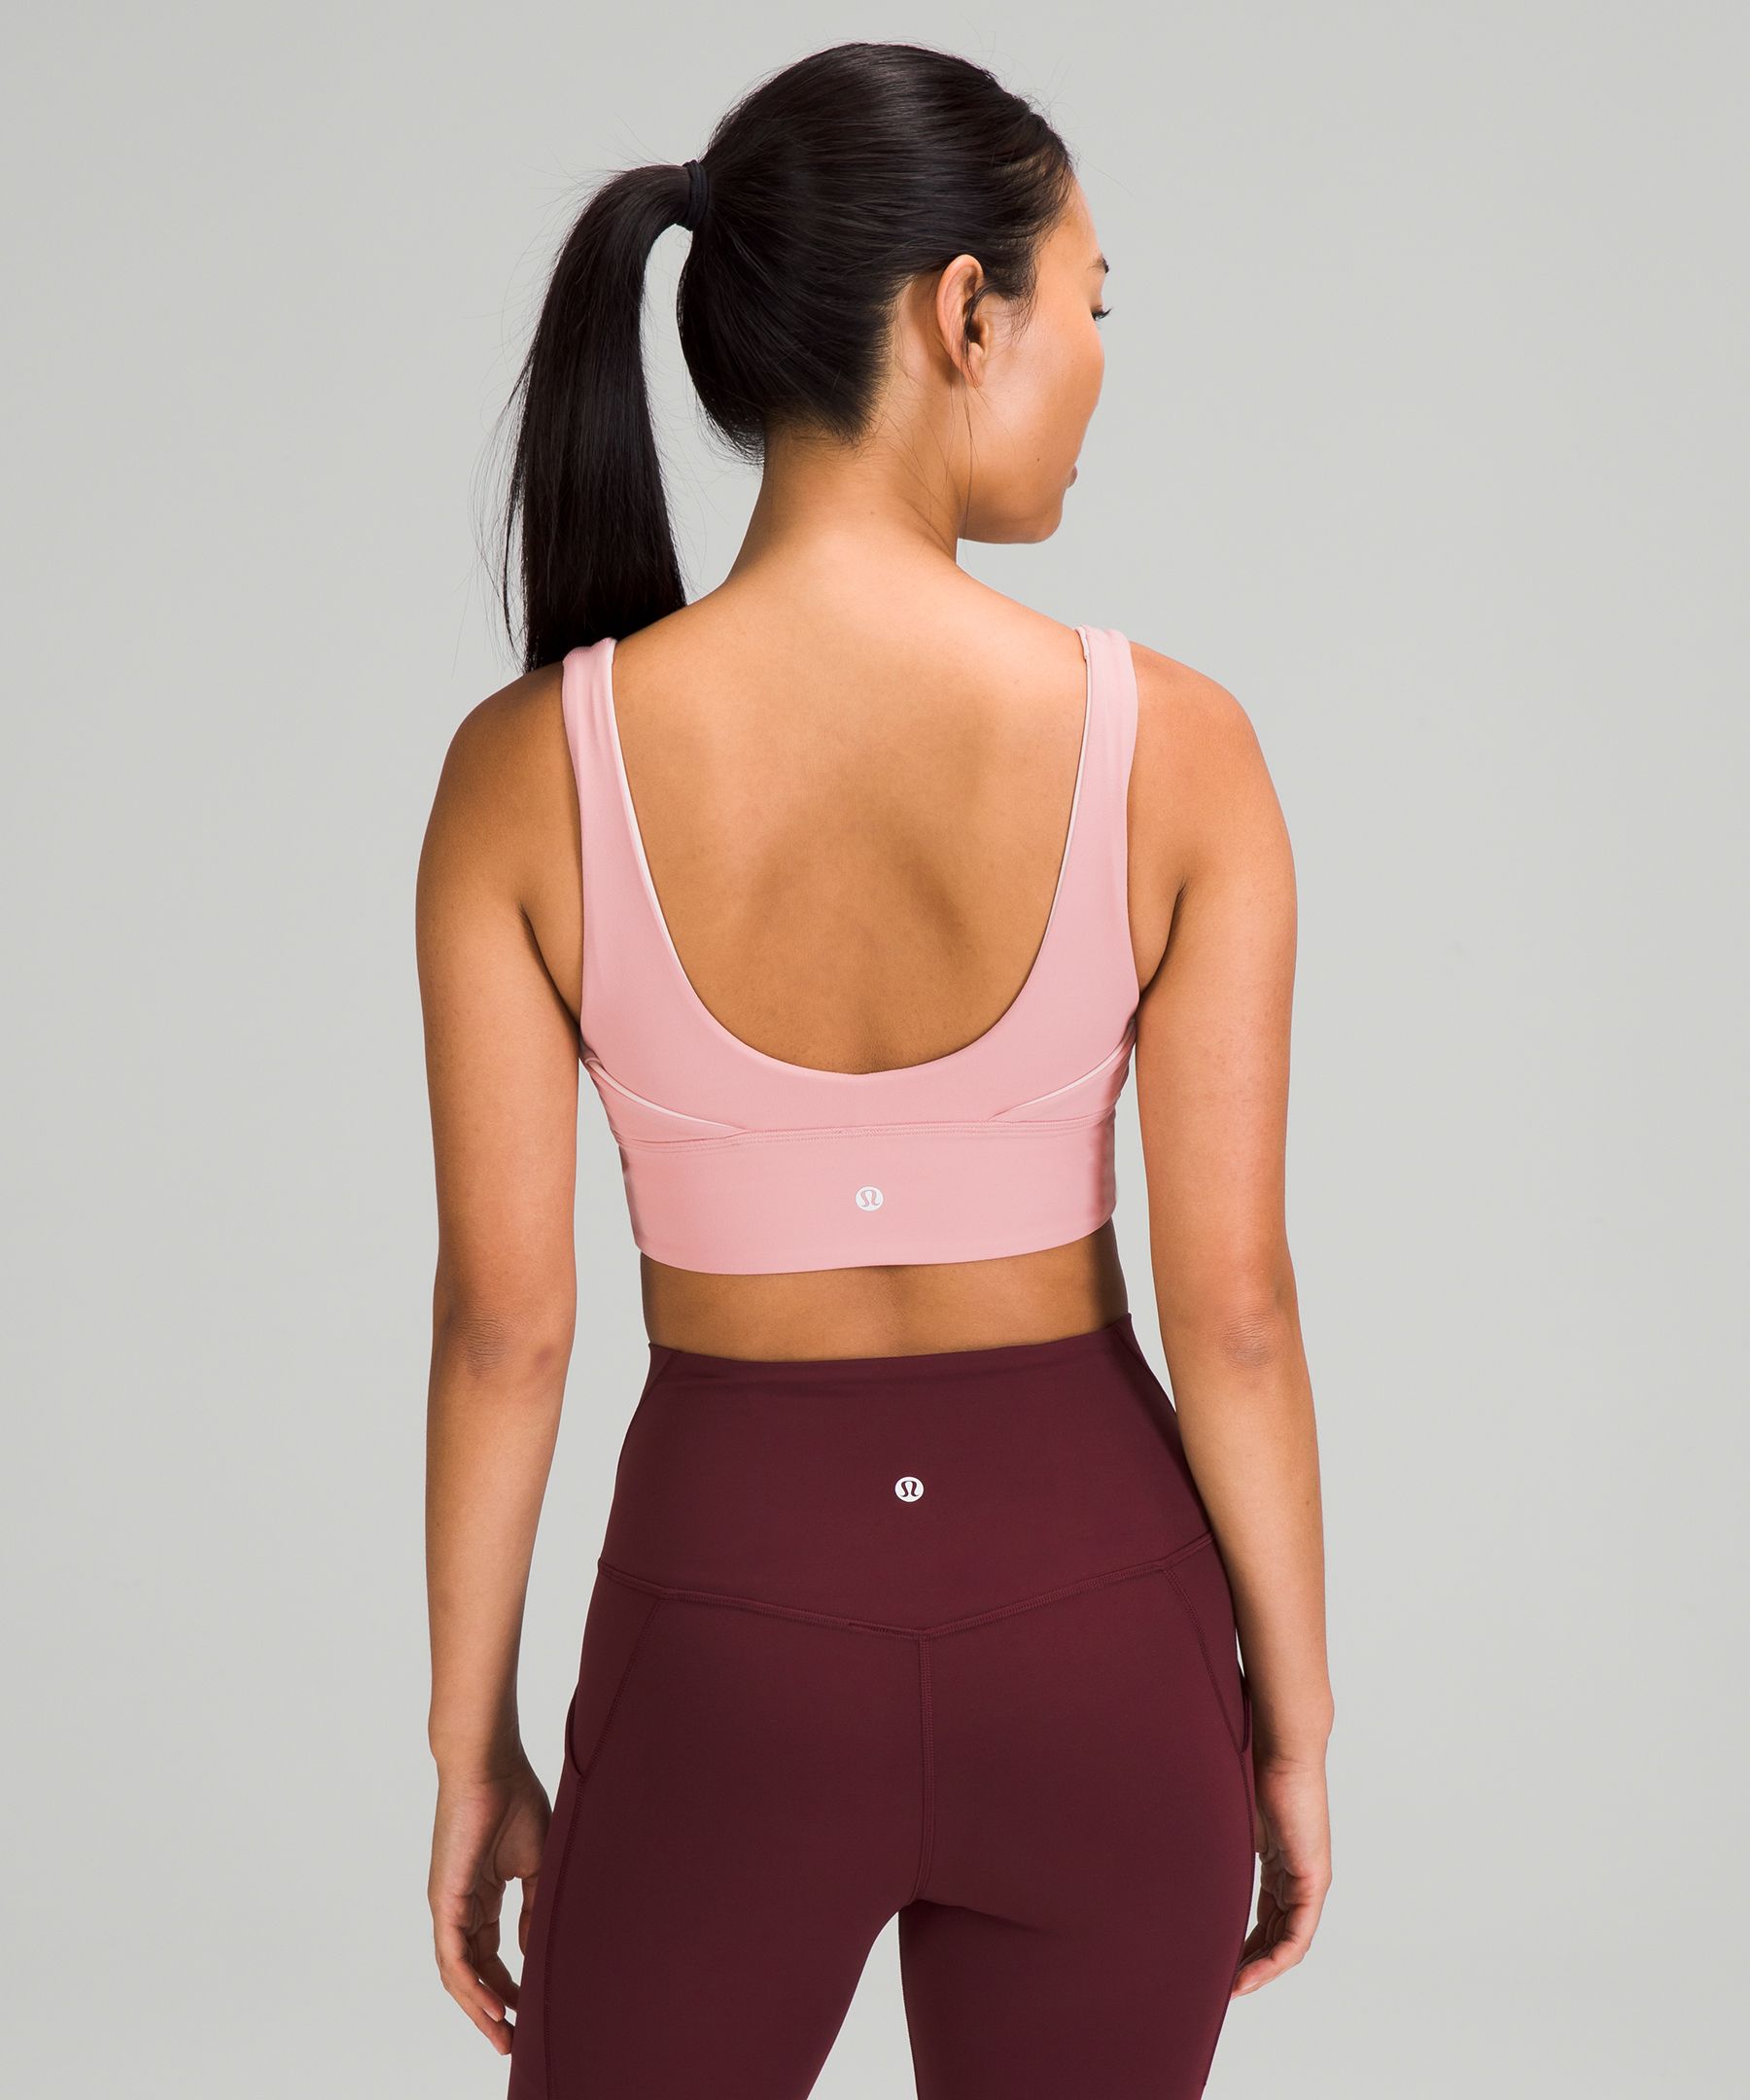 Lululemon Align Reversible Bra *Light Support, A/B Cup Green - $41 (29% Off  Retail) - From Peyten